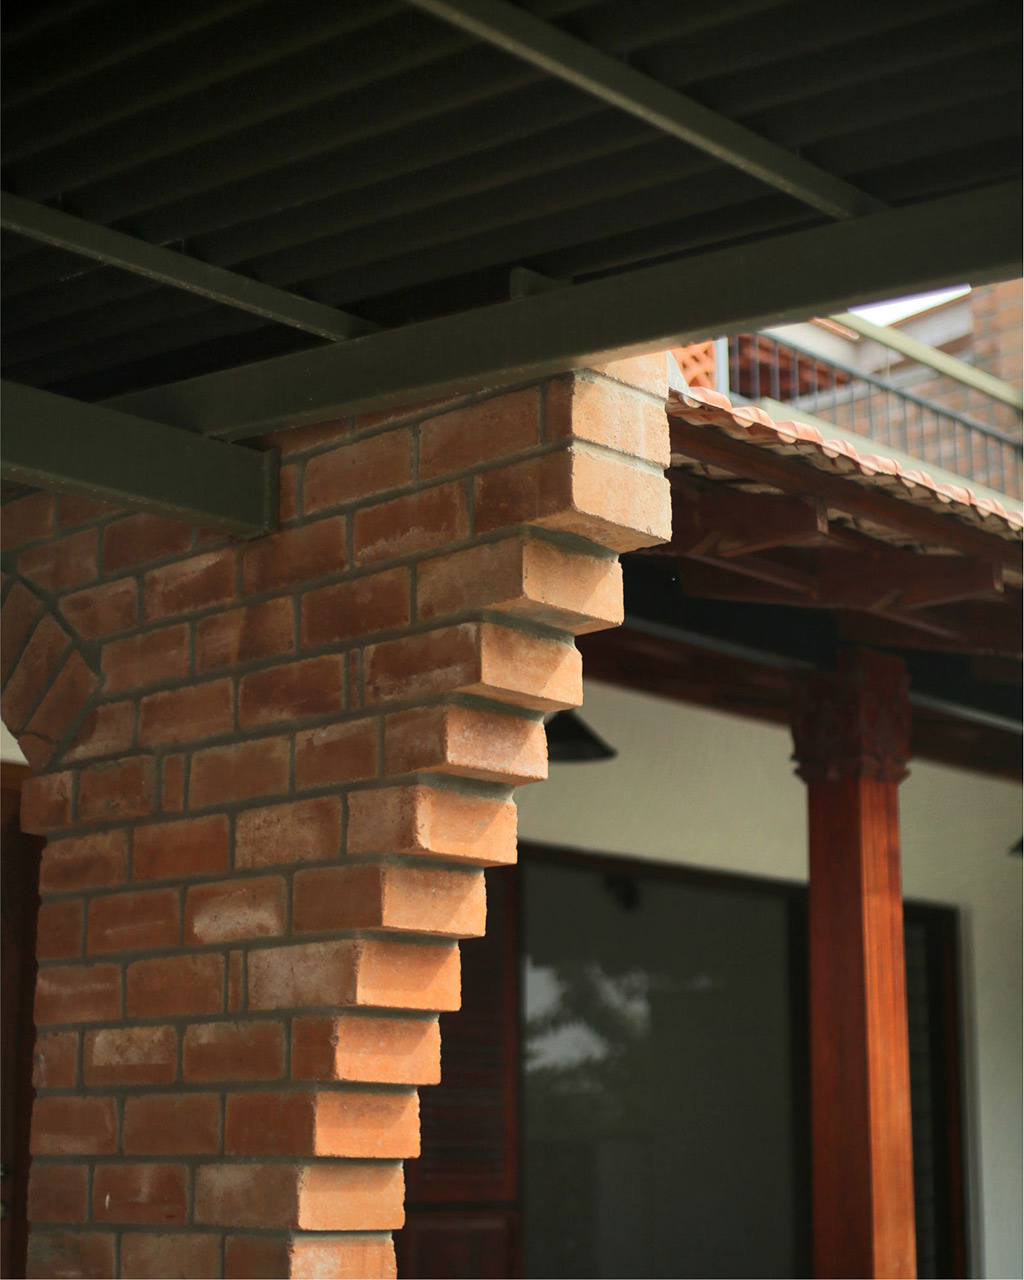 Corbels to support the roof and help the trasition between two roofing materials